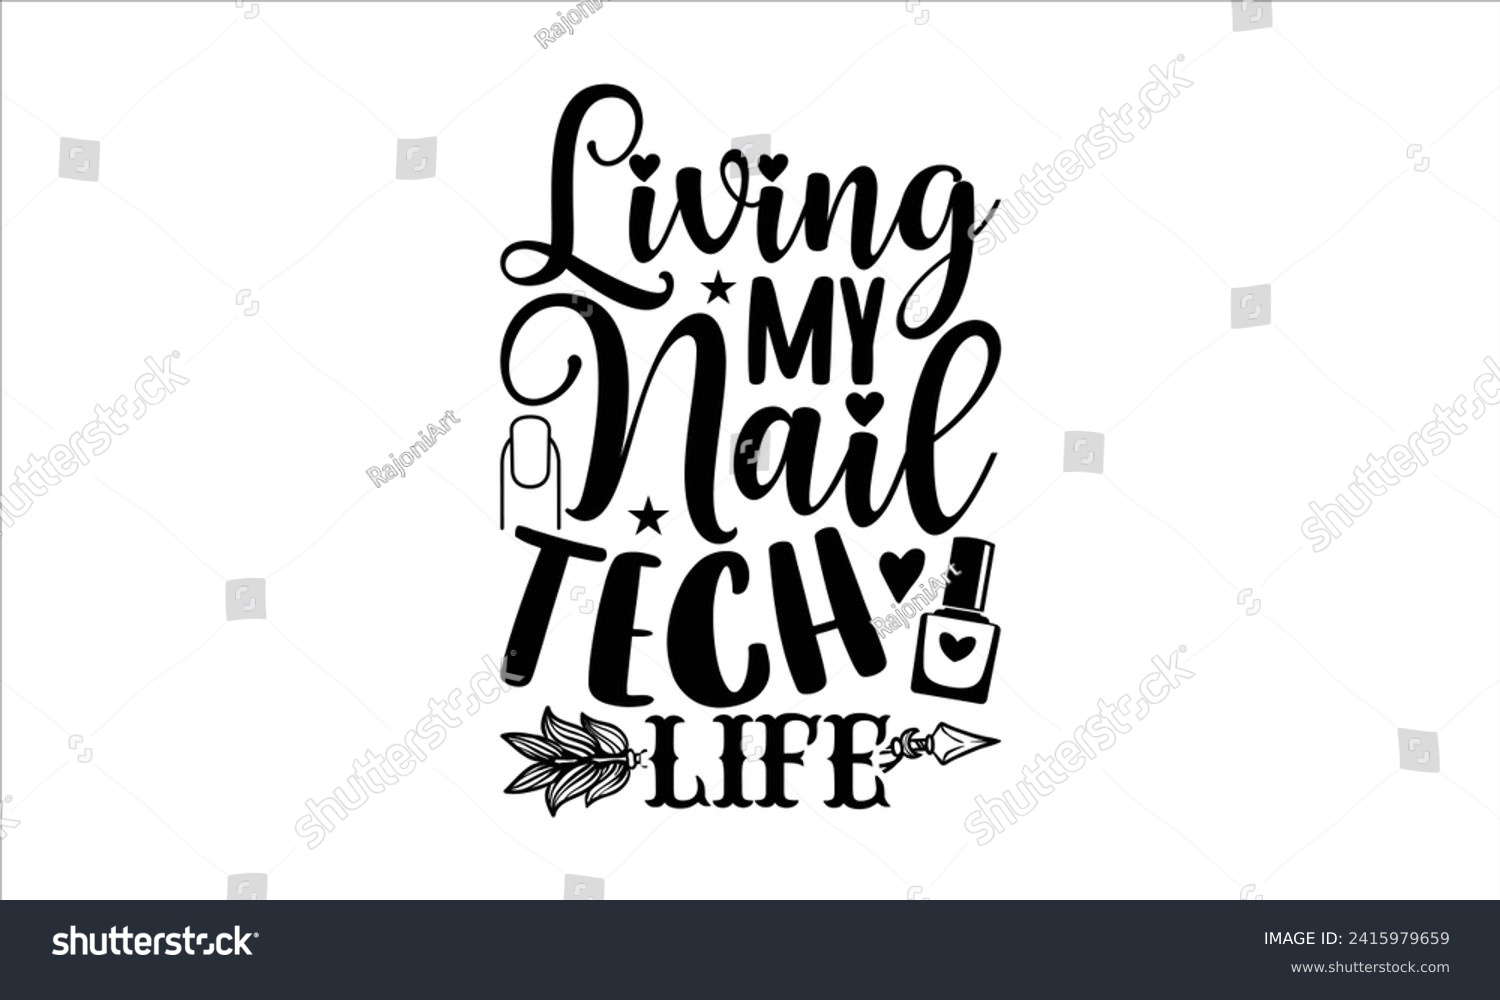 SVG of Living my nail tech life - Nail Tech T-Shirt Design, Modern calligraphy, Vector illustration with hand drawn lettering, posters, banners, cards, mugs, Notebooks, white background. svg